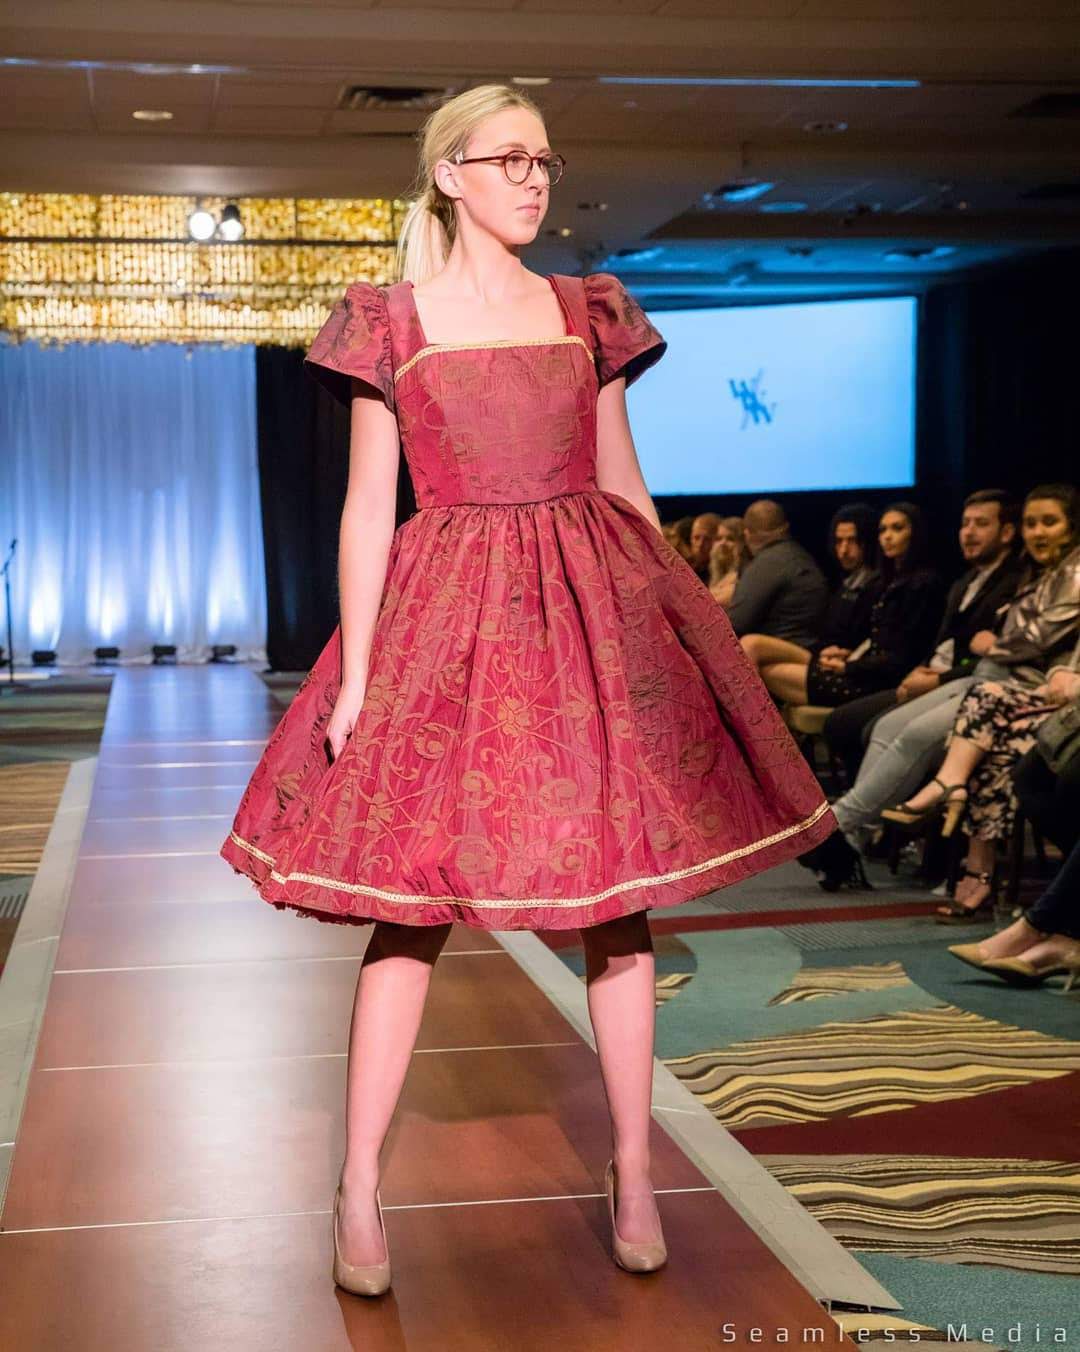 This rich in burgundy color is designed as a one-of-a-kind dress made personally by Hollyville shop owner, Pamela Marie.